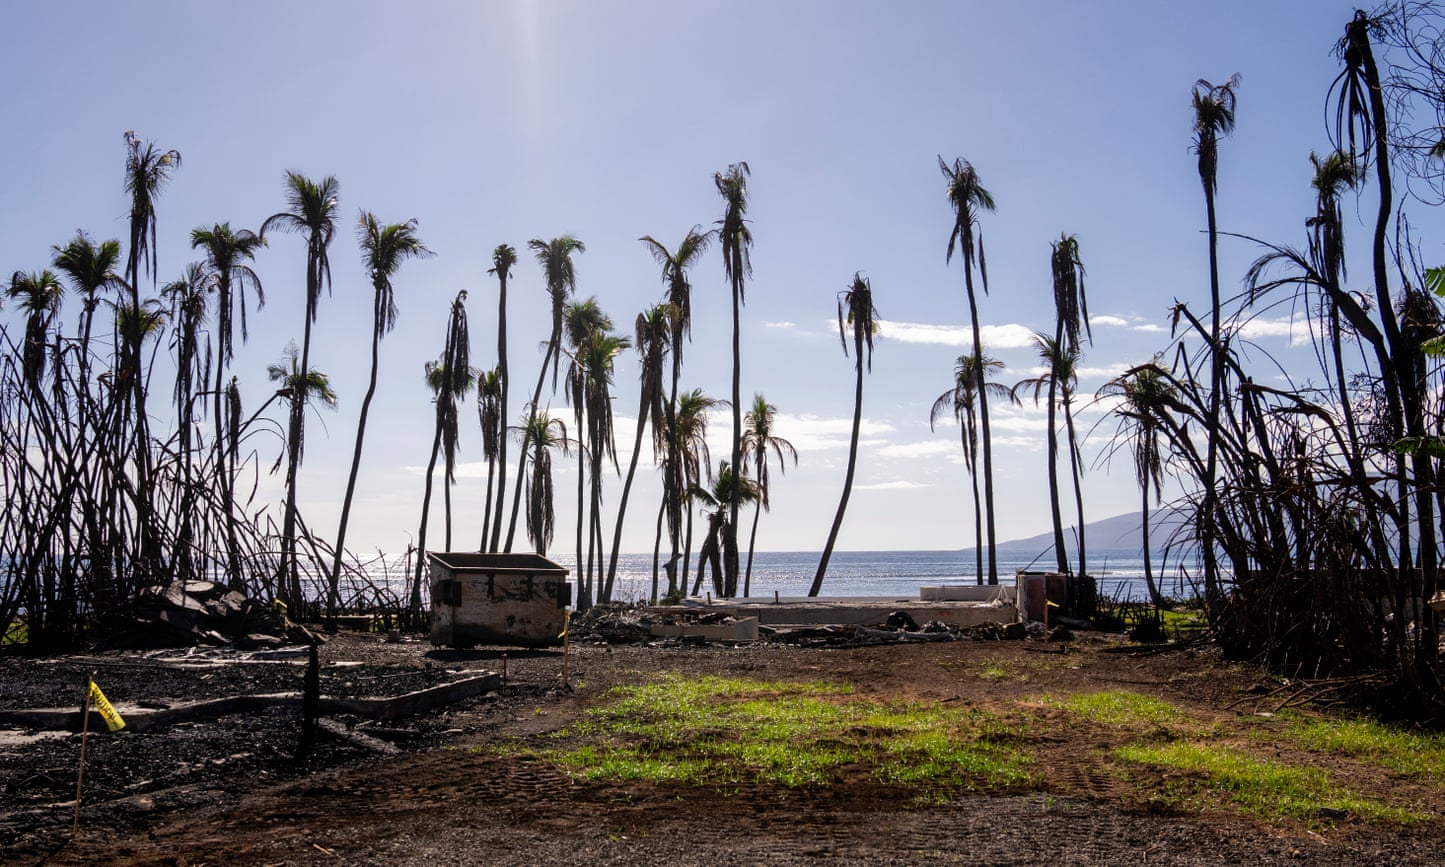 The sun shines down on a line of tall skinny palm trees with burned tops, and a partly grassy lawn with one small building on it.